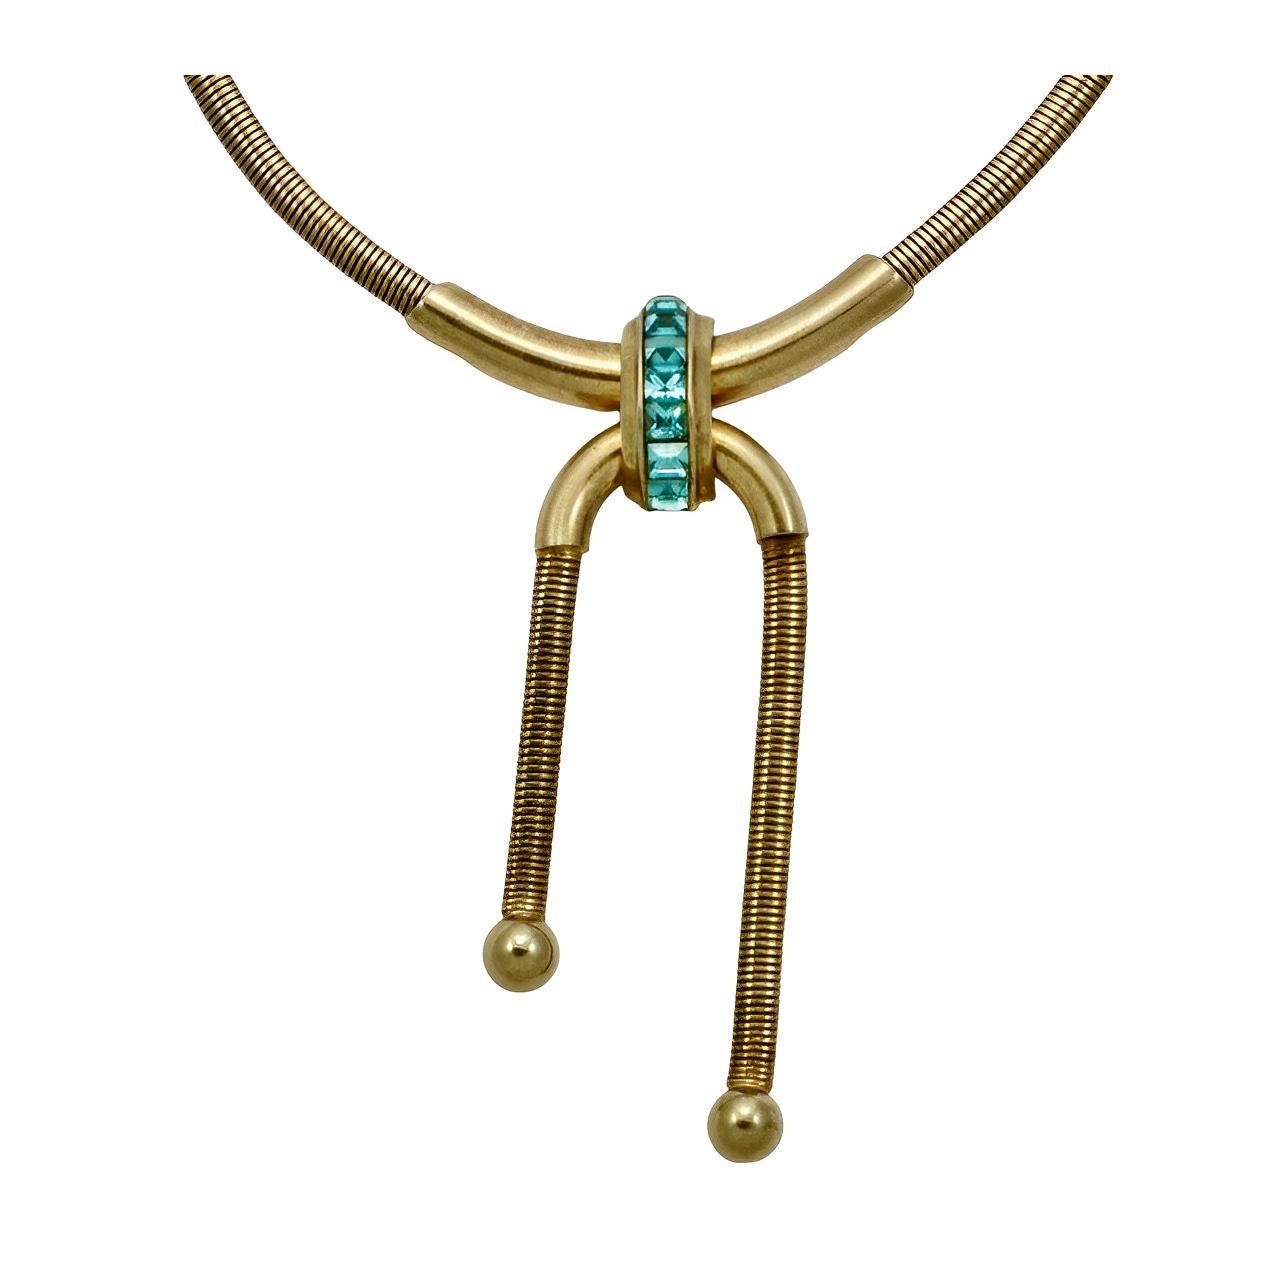 Coro Pegasus gold plated snake chain necklace featuring a beautiful aqua blue rhinestone pendant centrepiece. The pendant is free moving on the chain.

Measuring necklace length 42.5 cm / 16.7 inches, and the maximum length of the centrepiece is 8.7